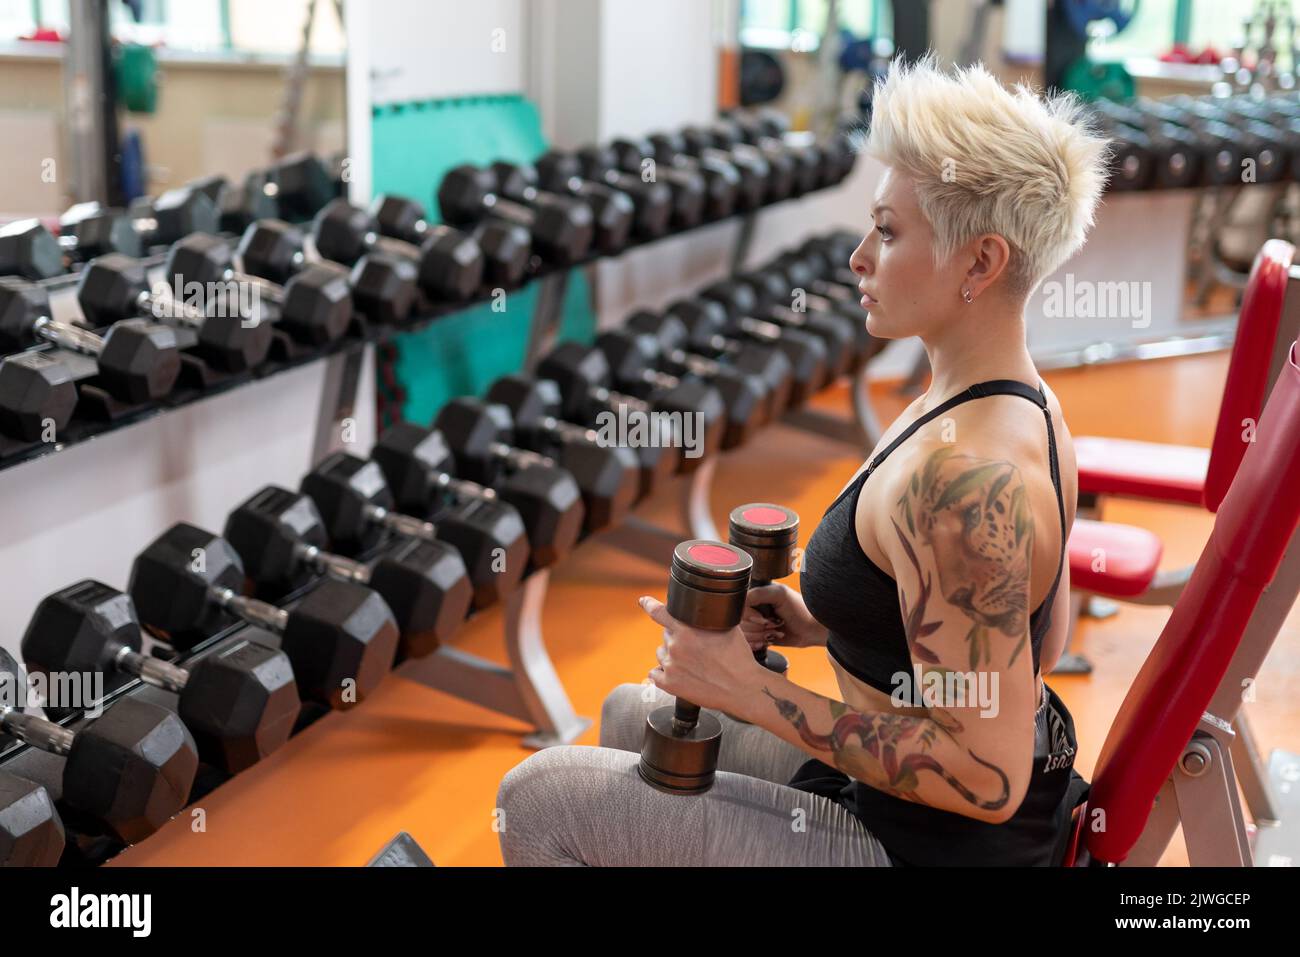 A young woman is engaged in fitness at the GYM. Stock Photo